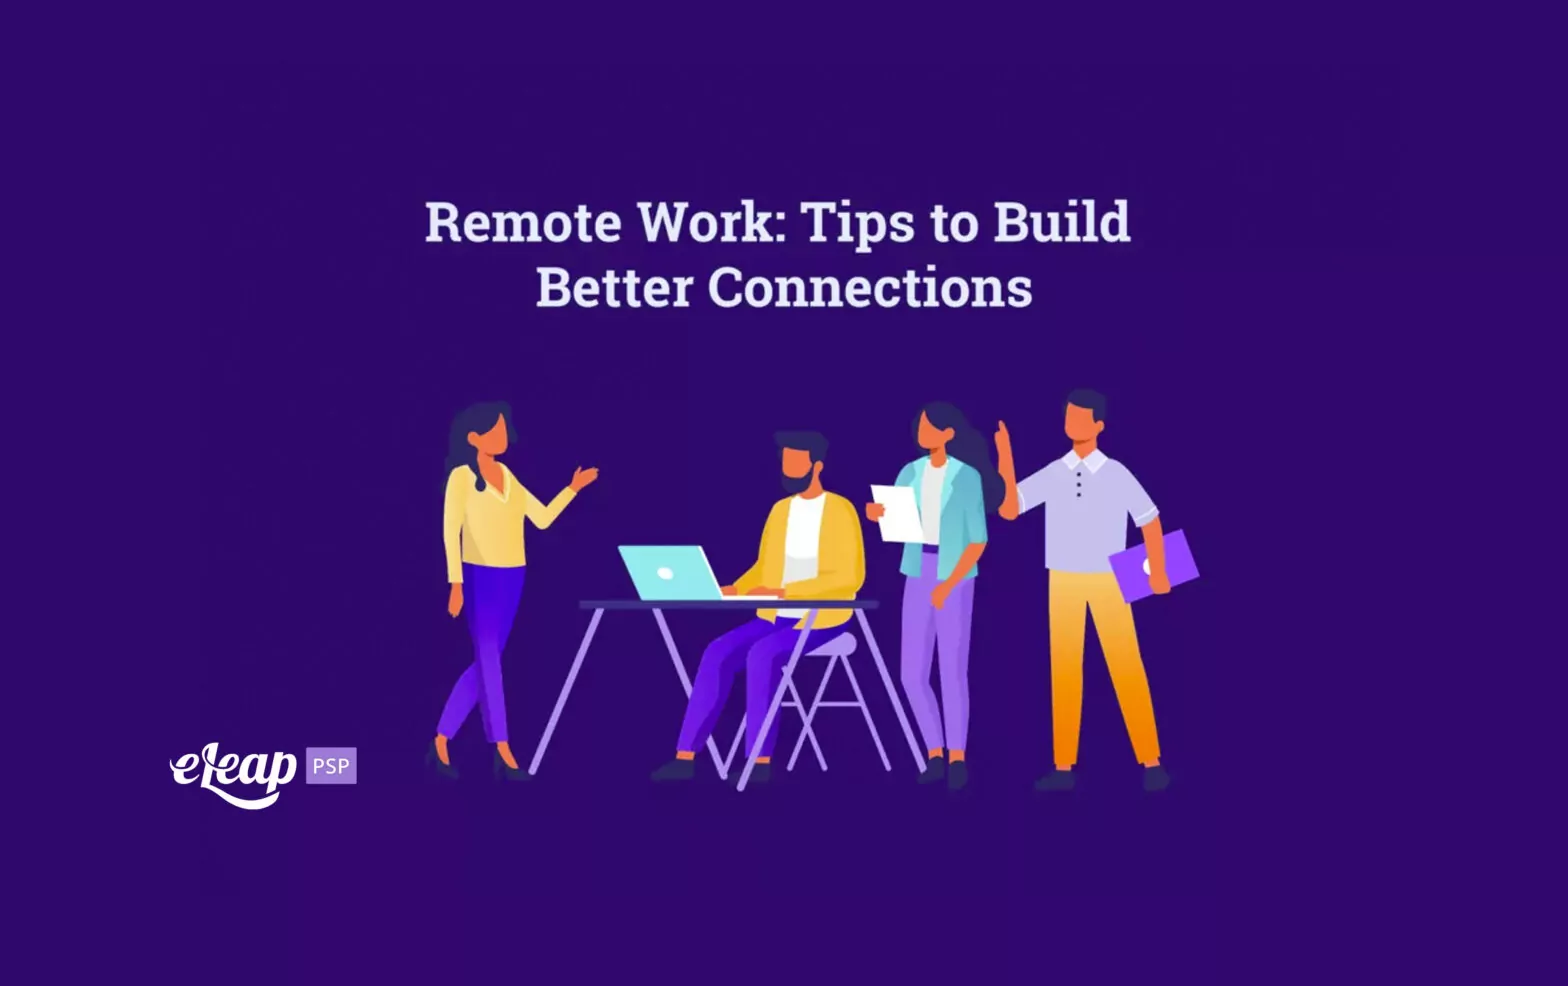 Remote Work: Tips to Build Better Connections